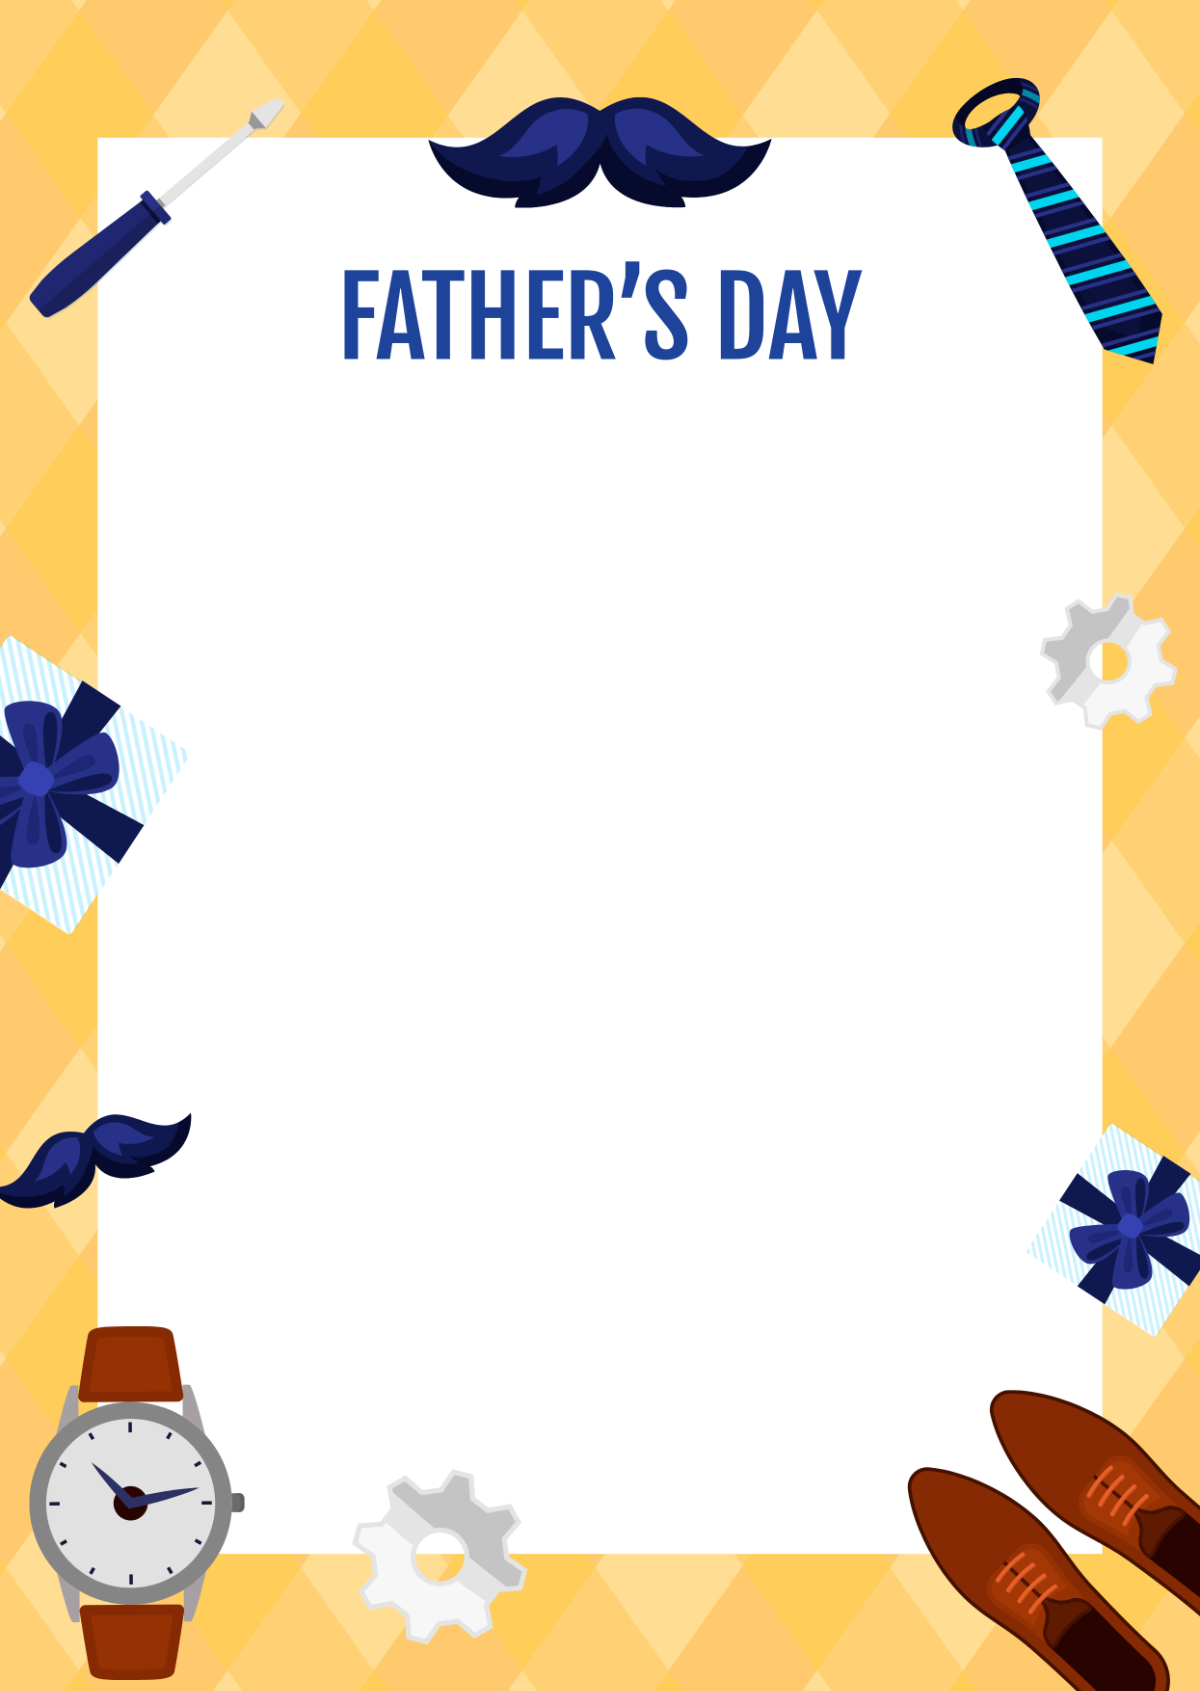 Father's Day Menu Background